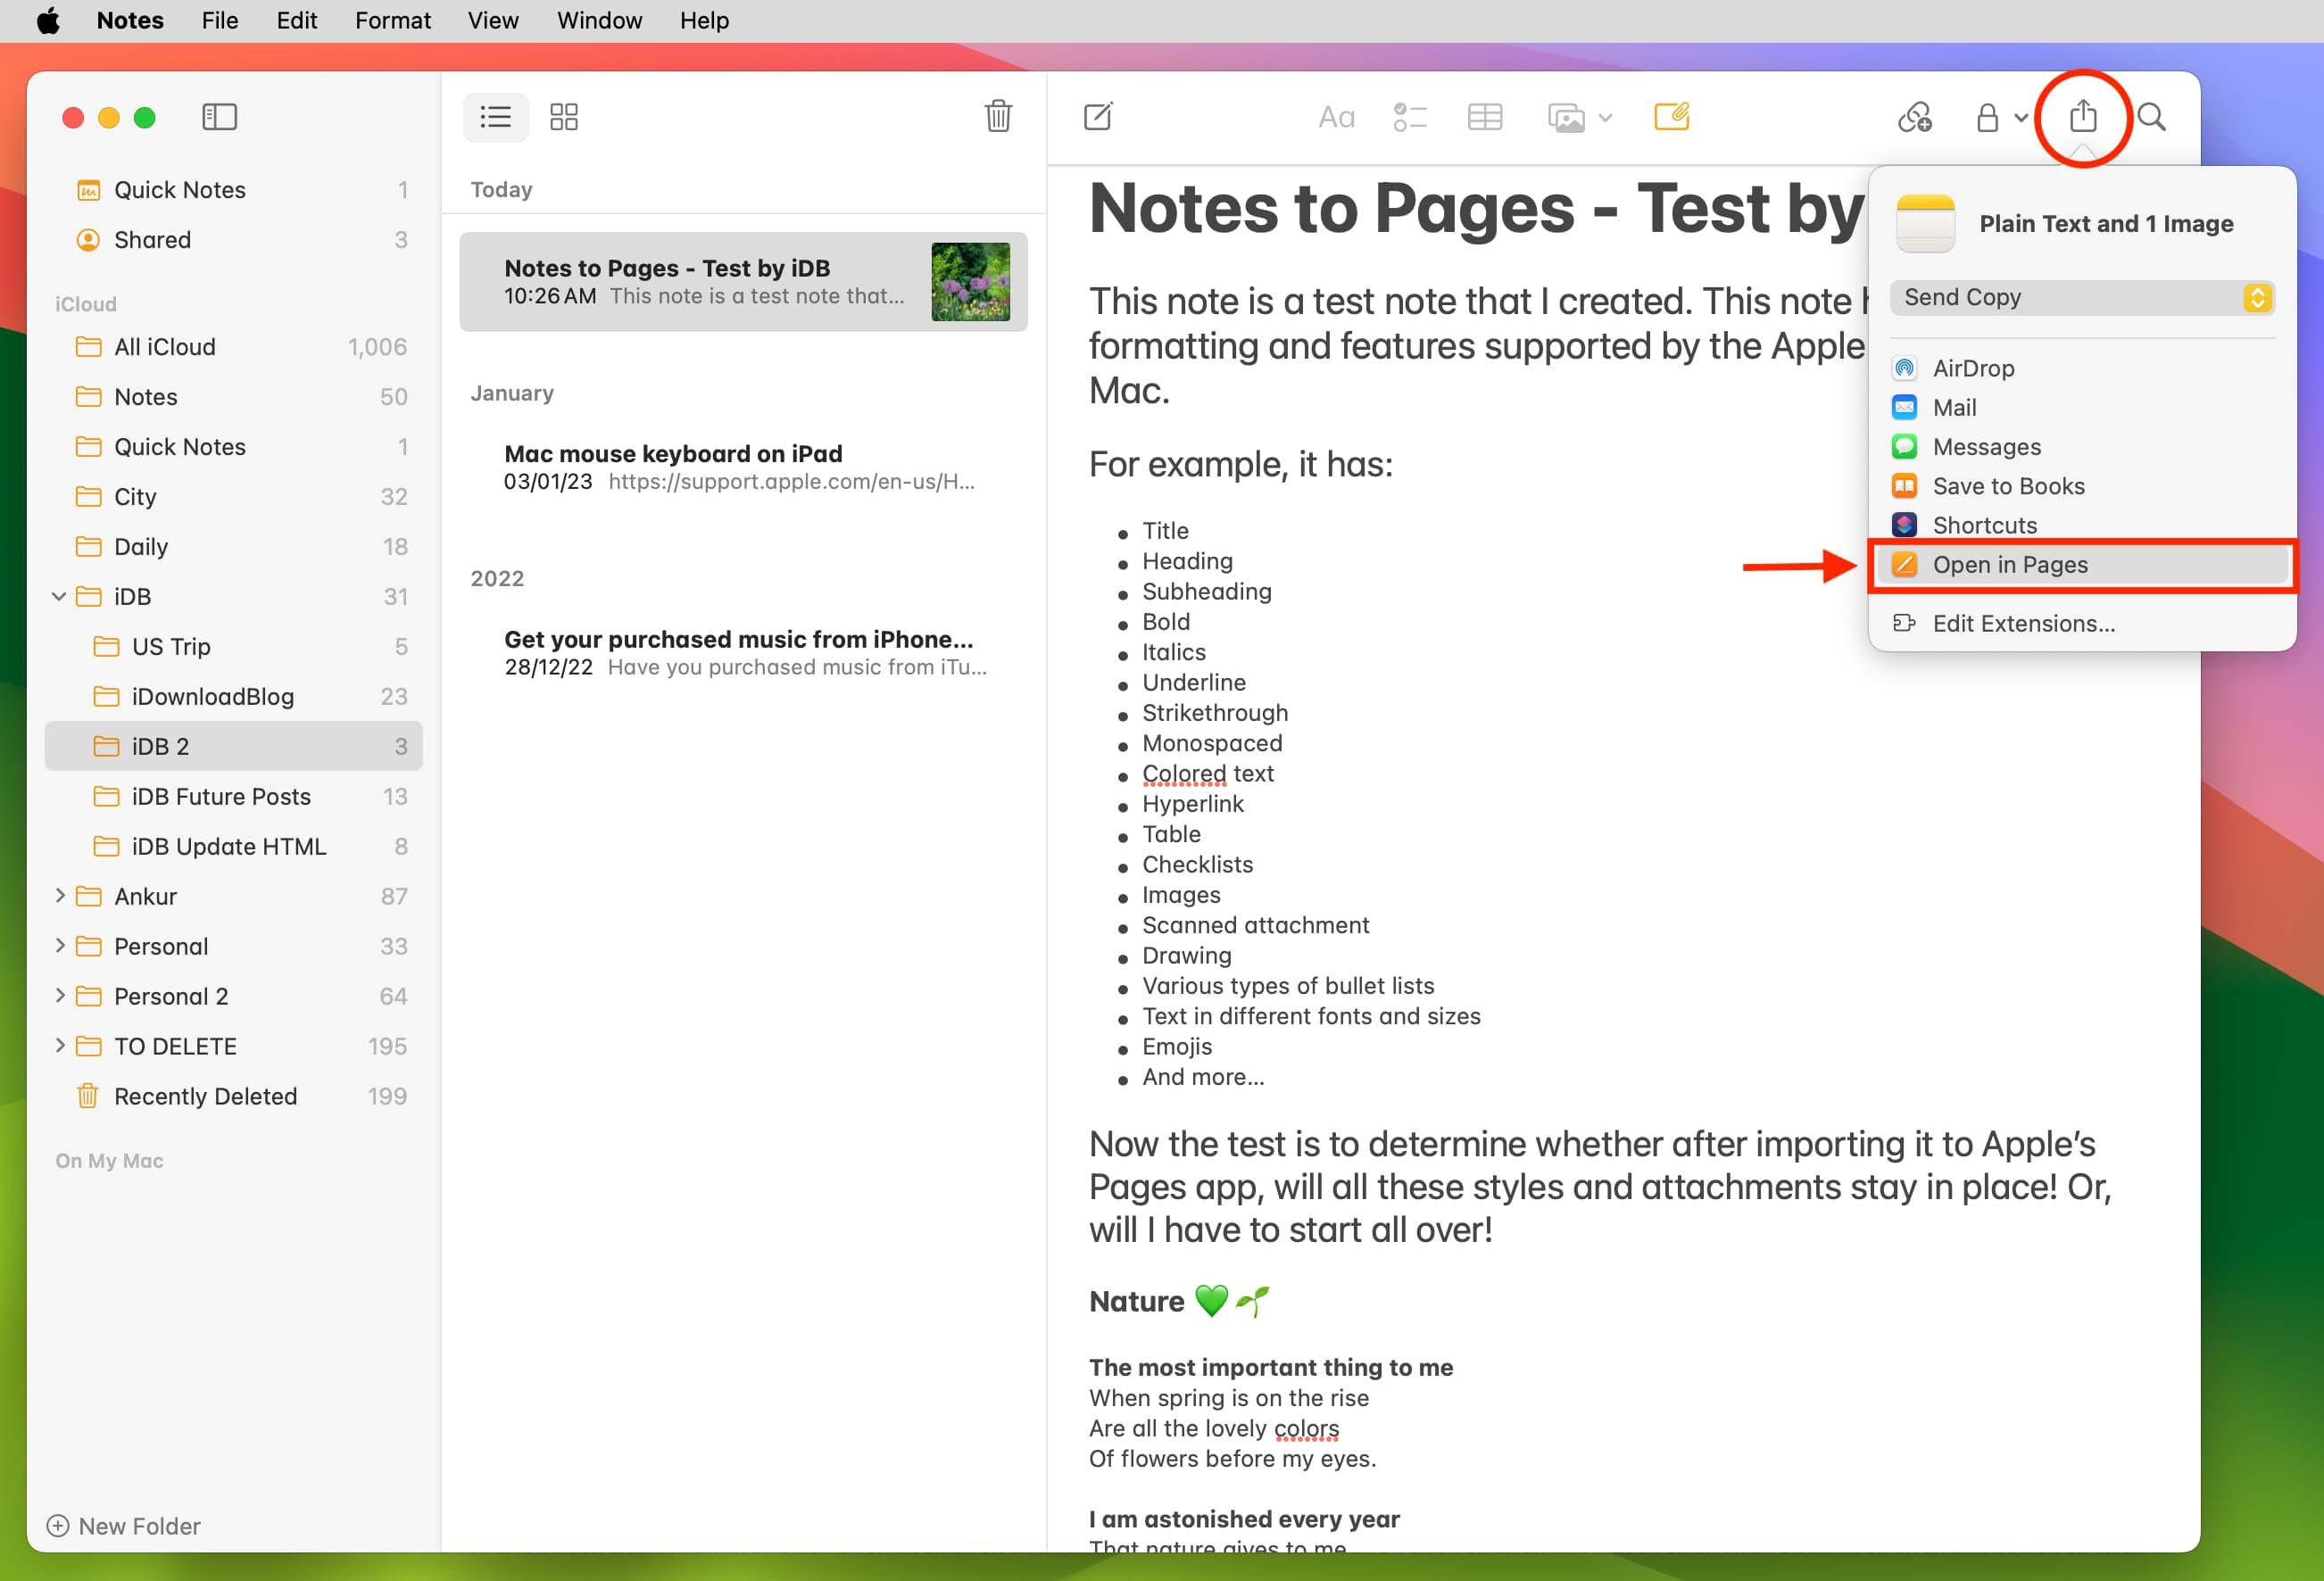 Open in Pages option inside the Notes app on Mac